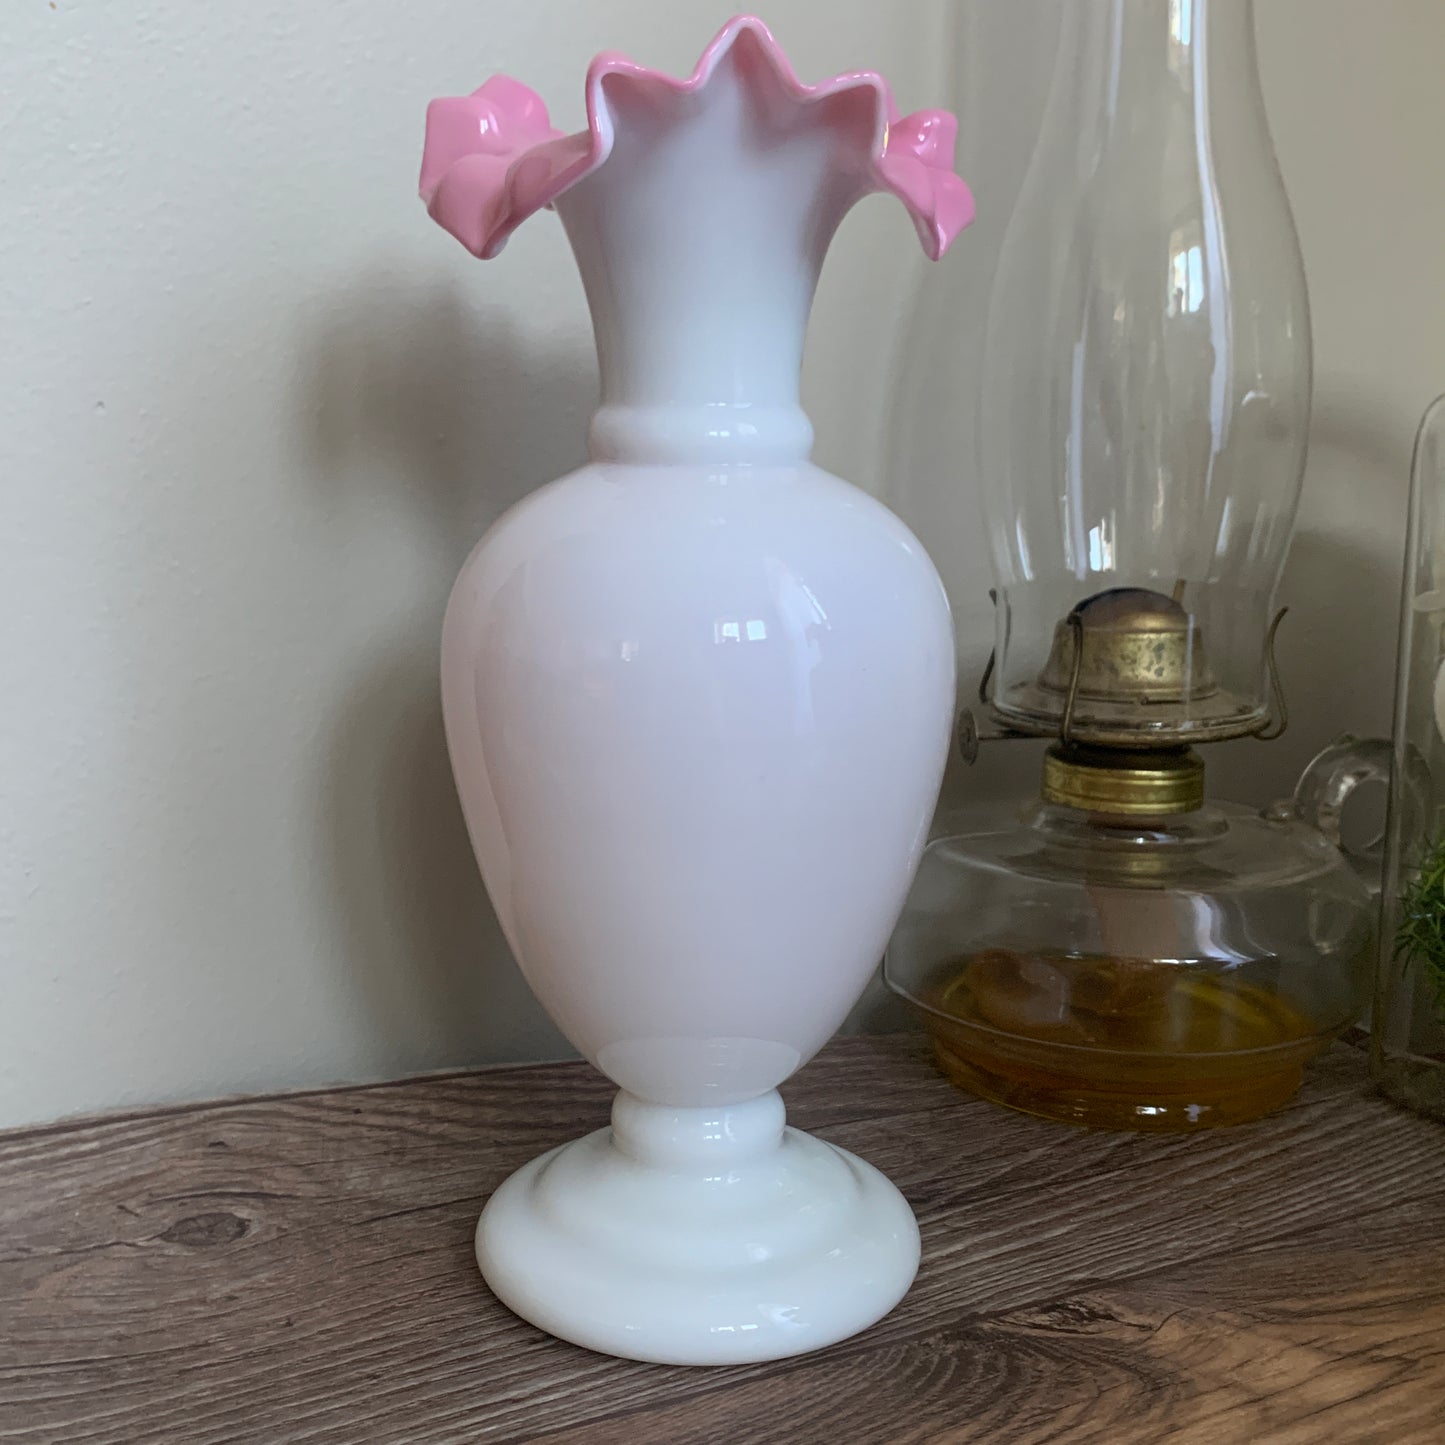 Antique Blown Glass Mantle Vases White and Pink Hand Painted Vase Pair